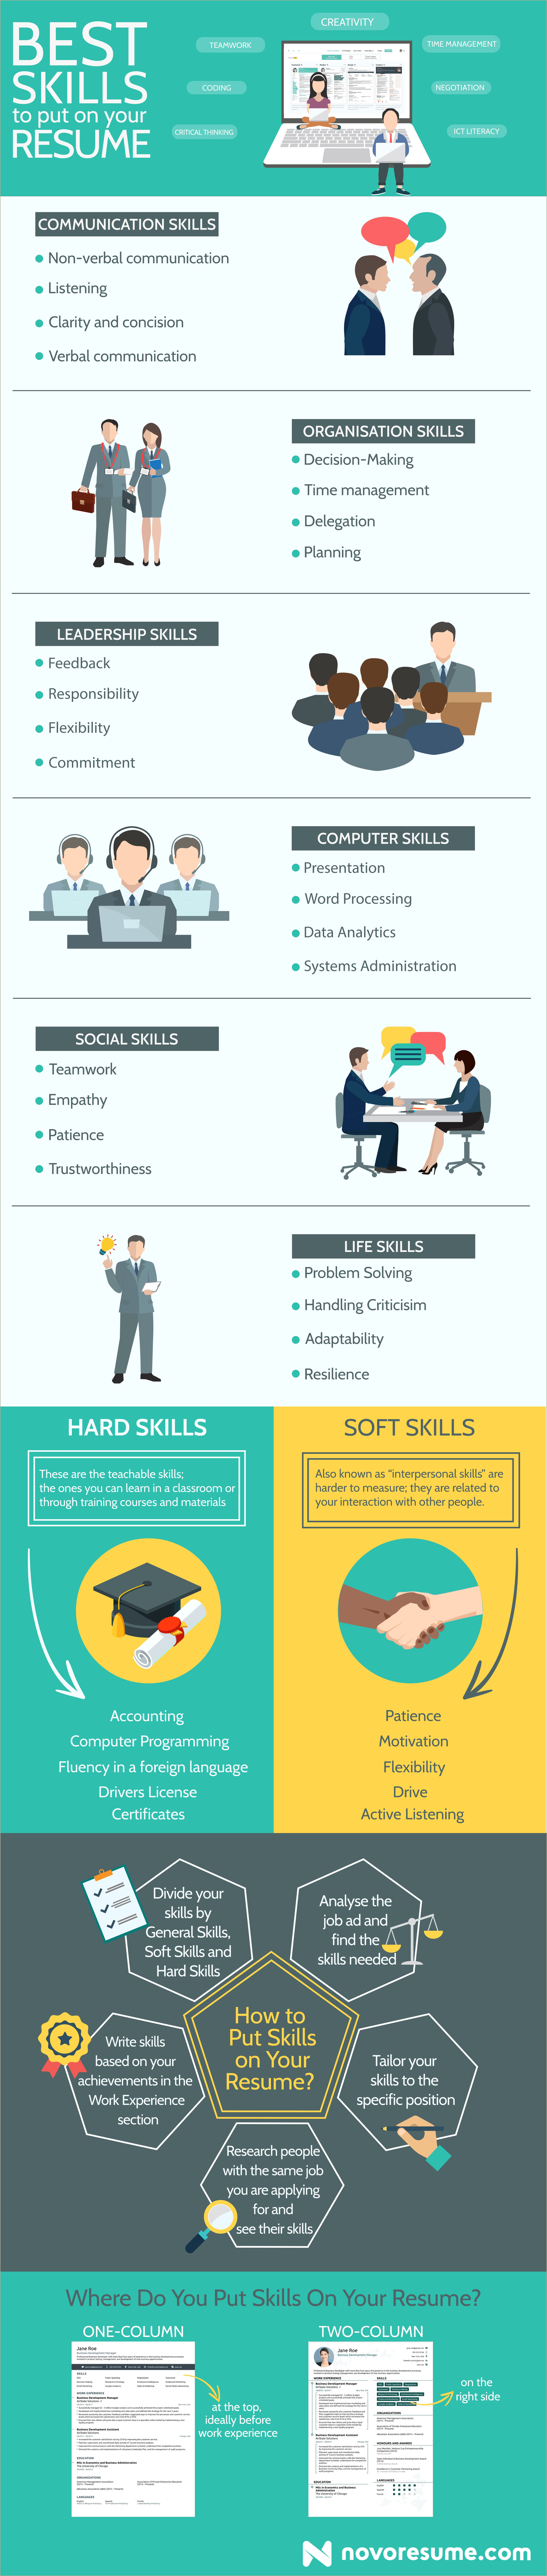 Interpersonal Skills To Put On A Resume